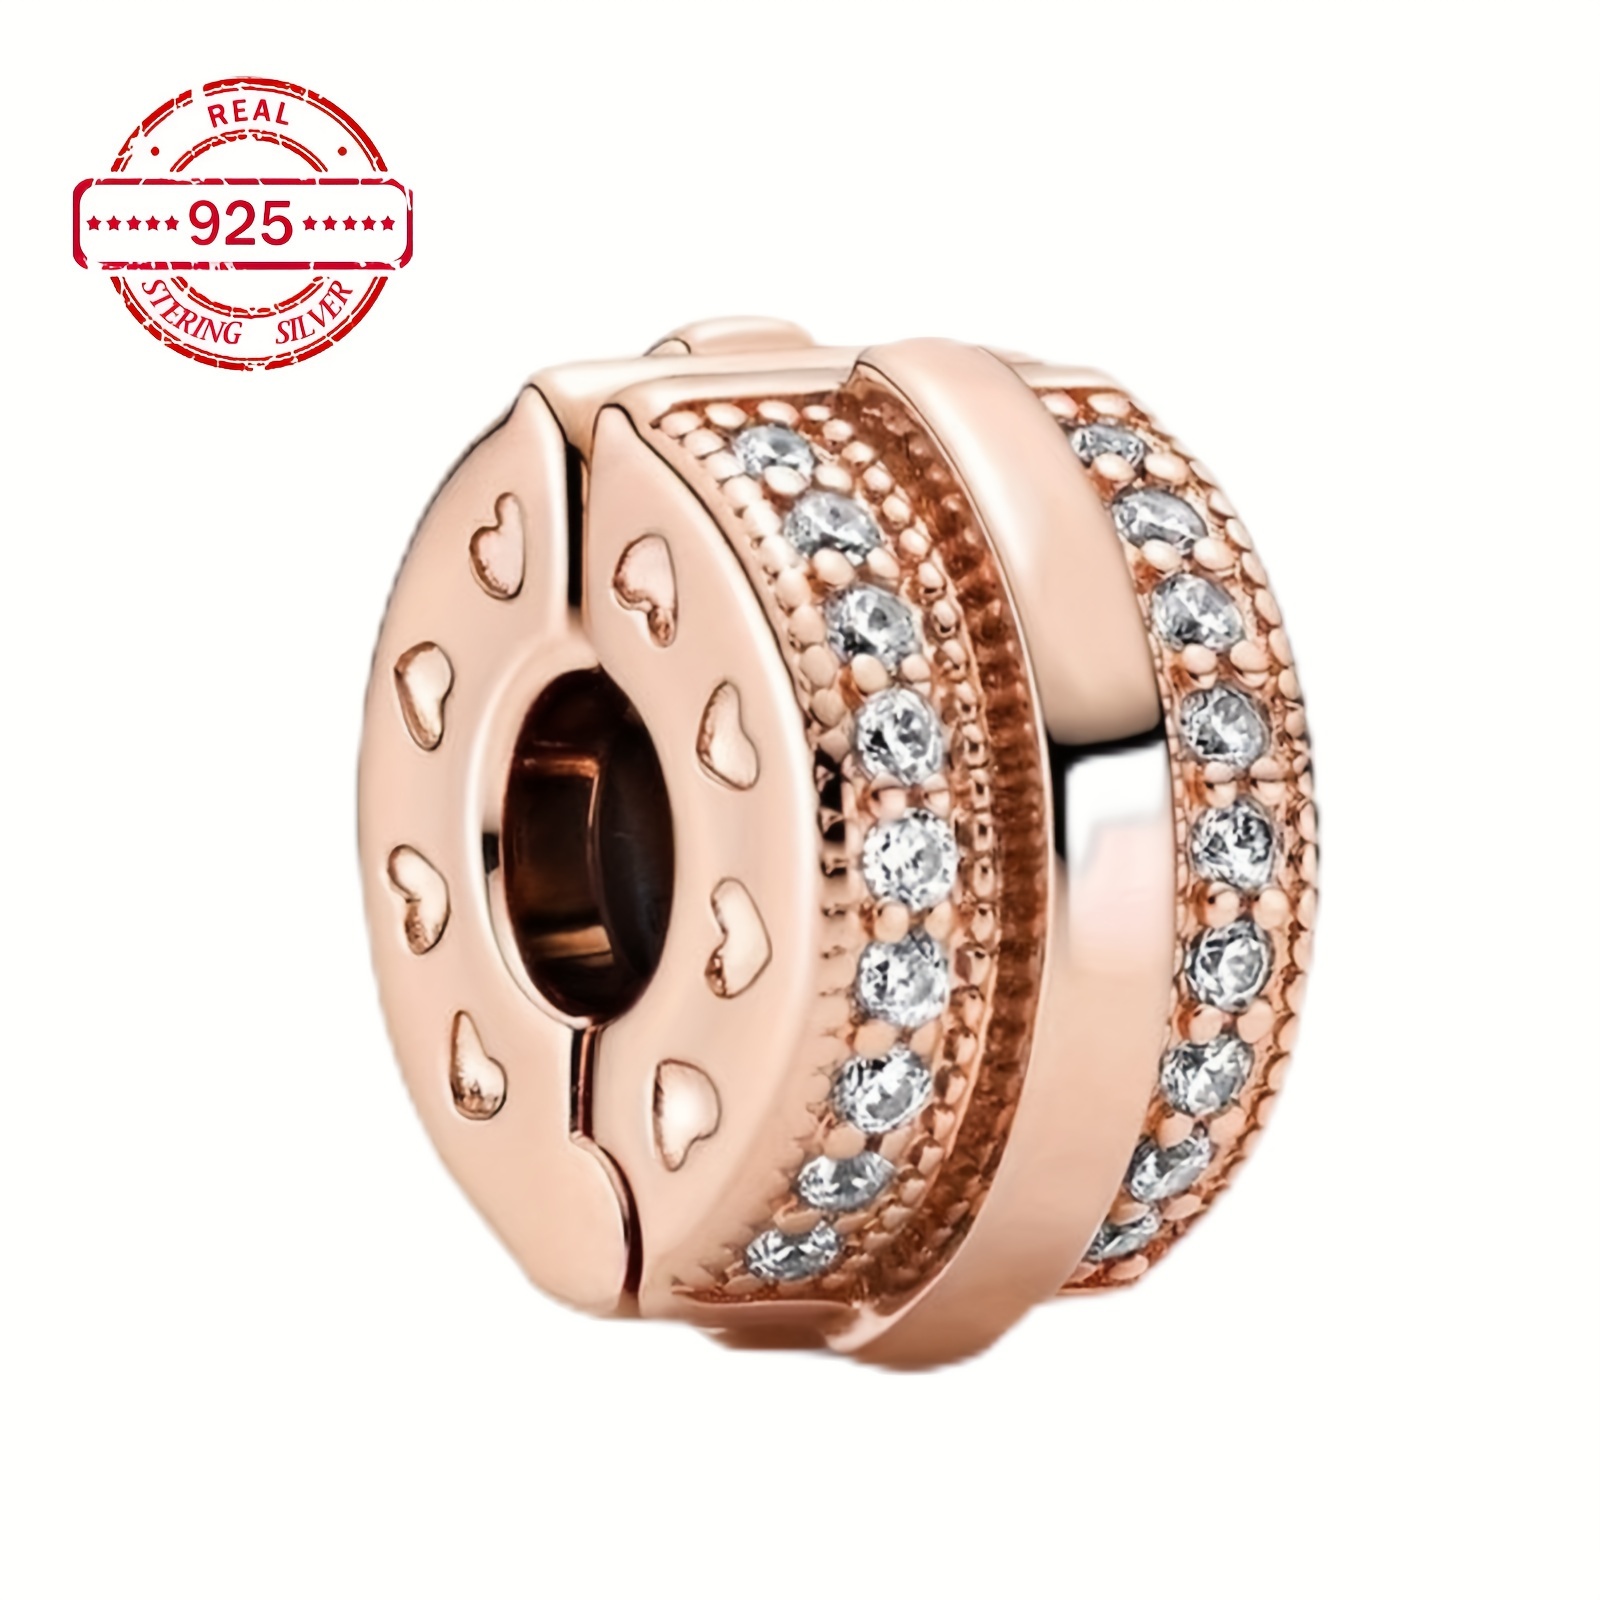 

S925 Sterling Silver Sparkling Pave Lines Rose Gold Clip Charm Pendant Fit Women European Moment Bracelet & Necklace Luxury Gift Diy Jewelry Making